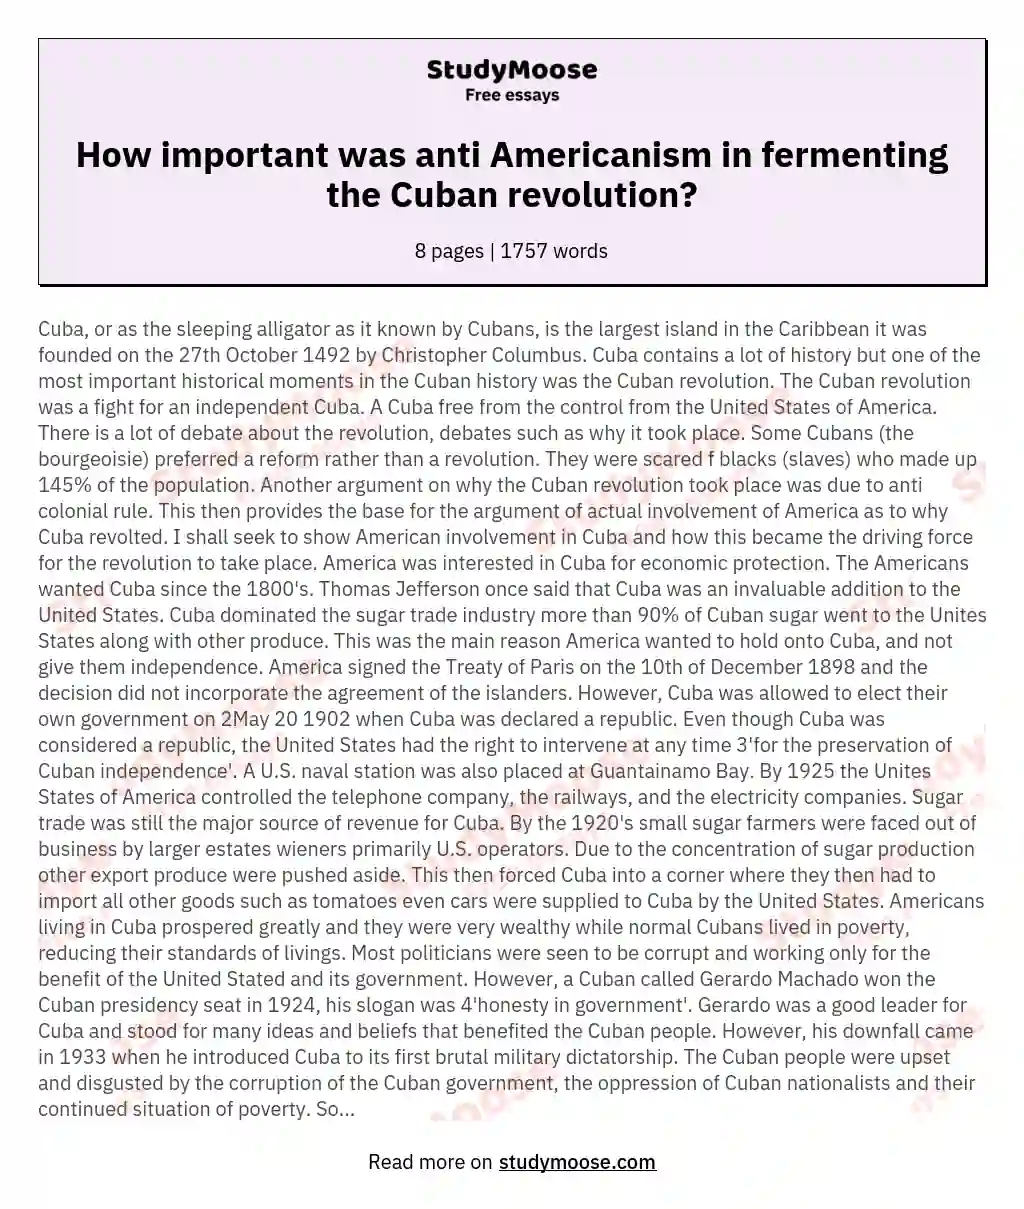 How important was anti Americanism in fermenting the Cuban revolution?